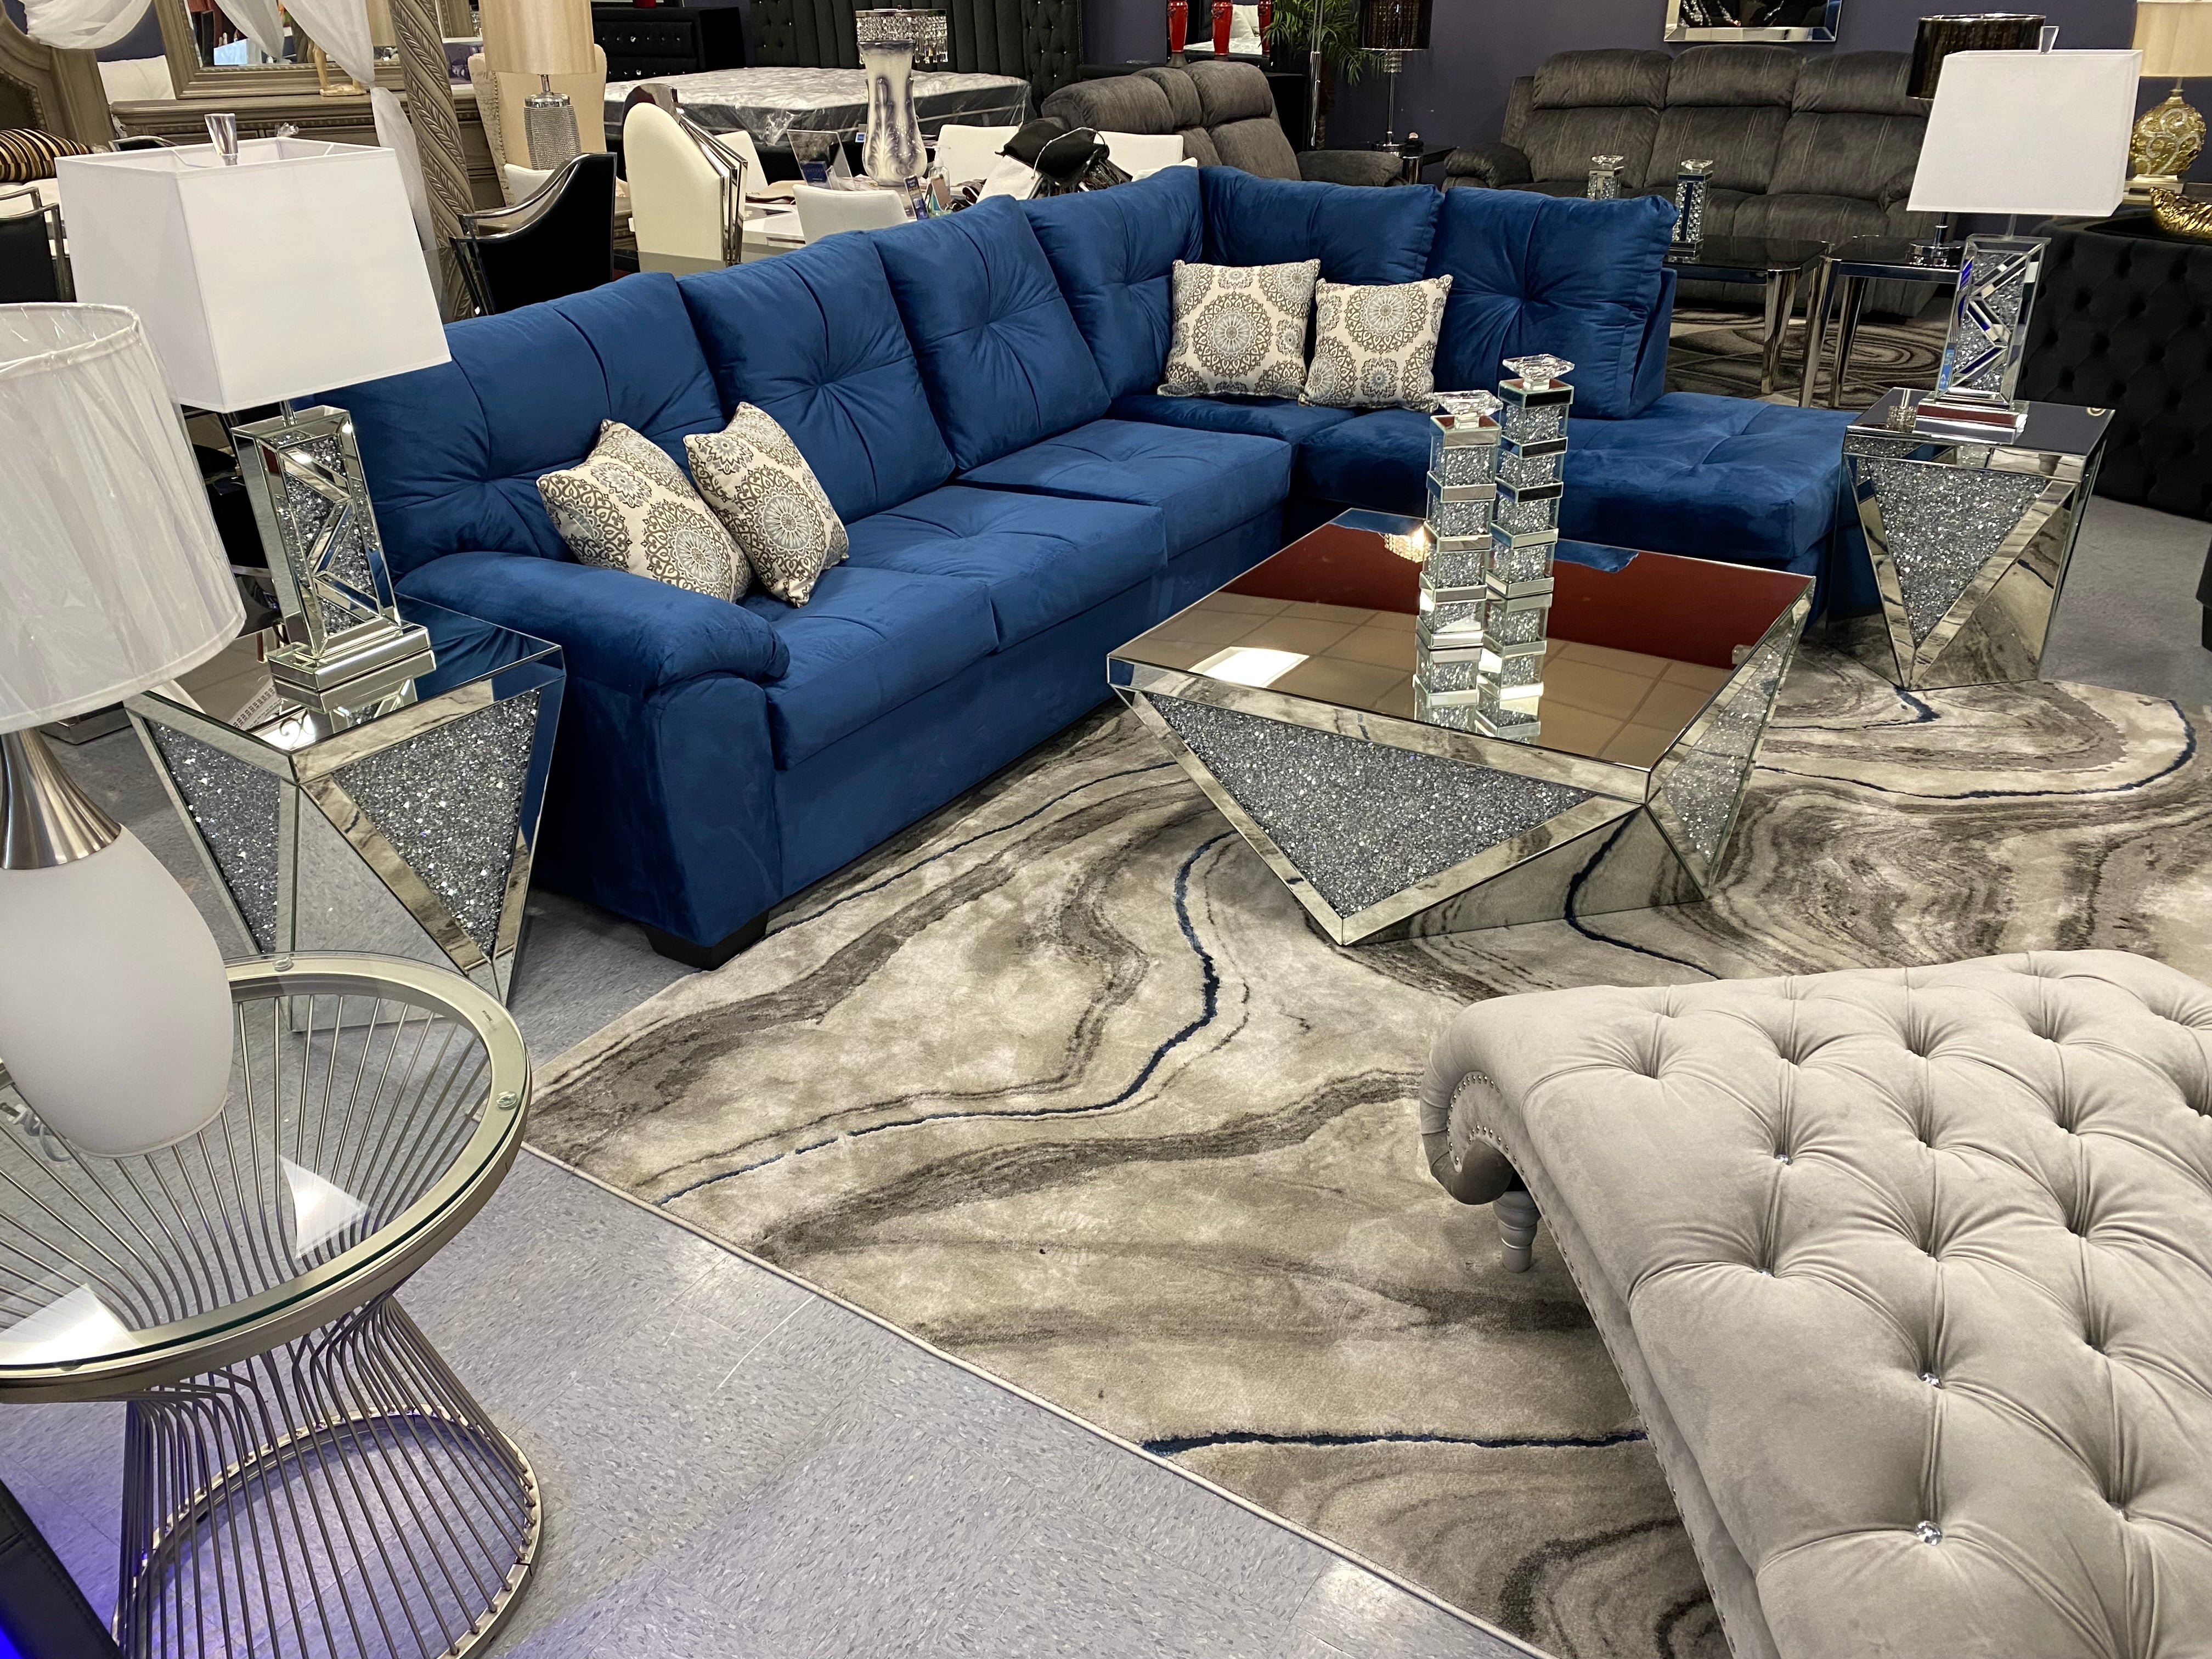 CRISTAL ROYALE Upholstered Sectional Sofa in Coastal Blue Premium Chanel Velvet Fabric ** Available In Over 500 in house Colors and Patterns to Choose From, ** Custom Made To Order ** Design It Your Way